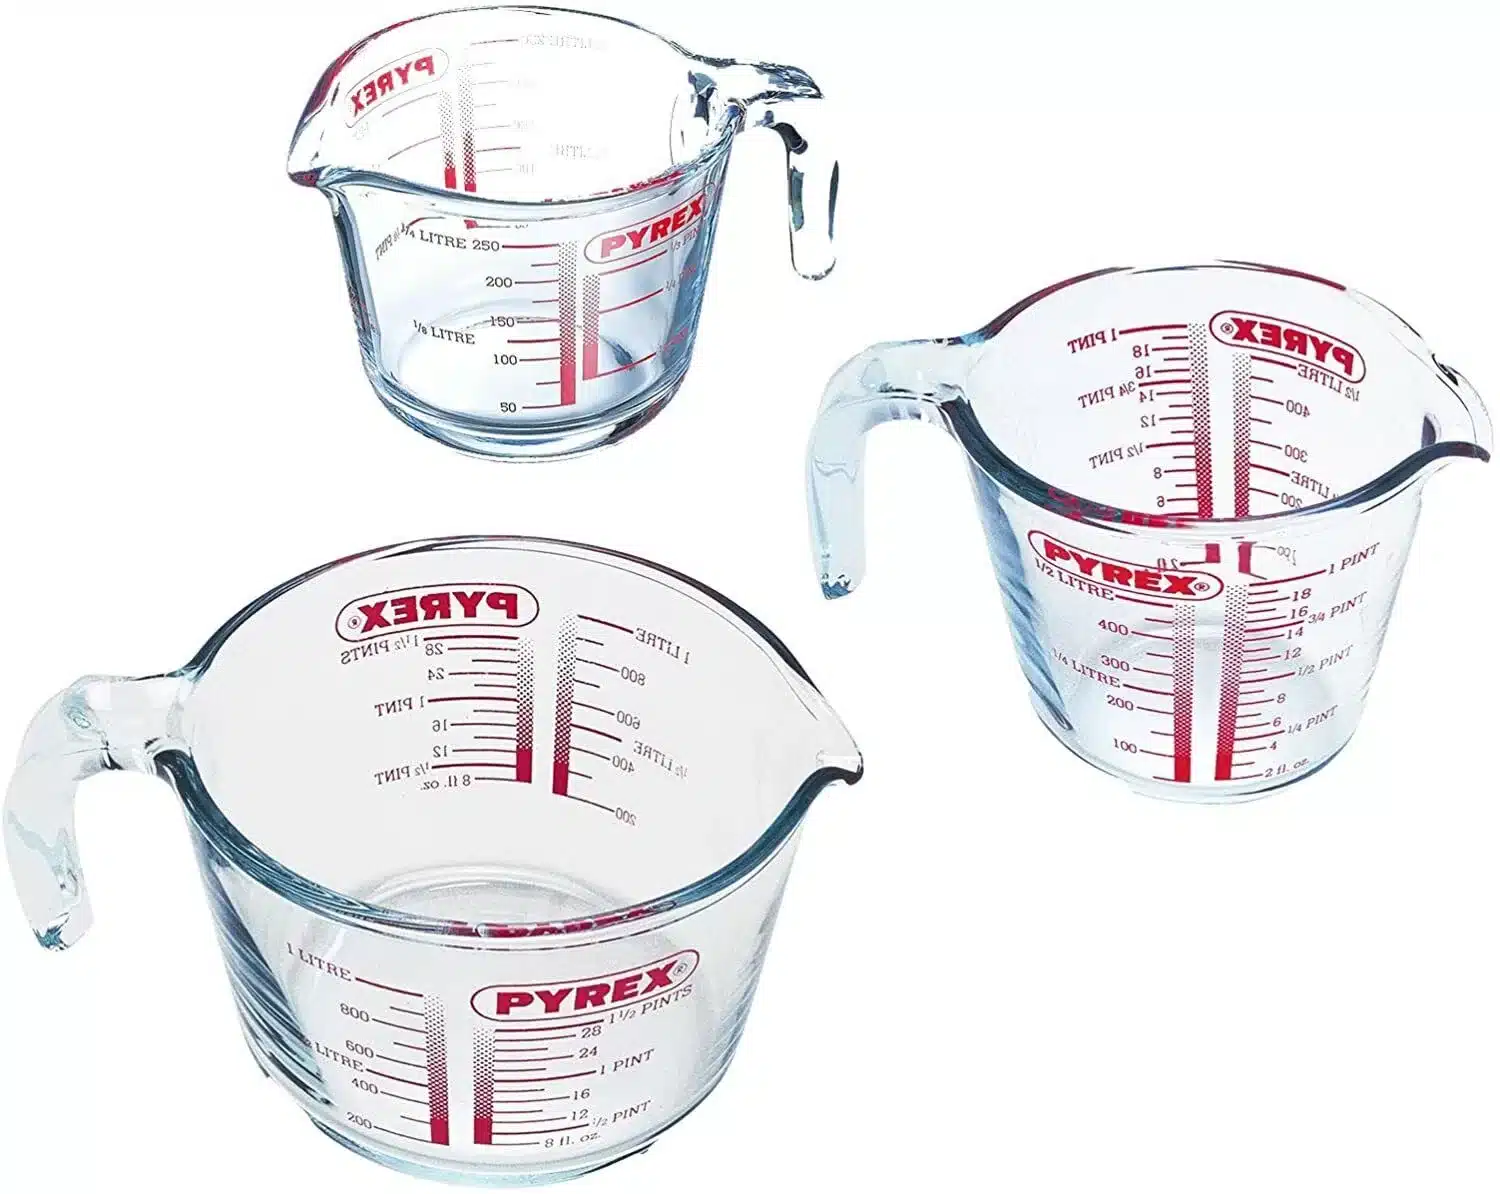 Is pyrex microwave safe?